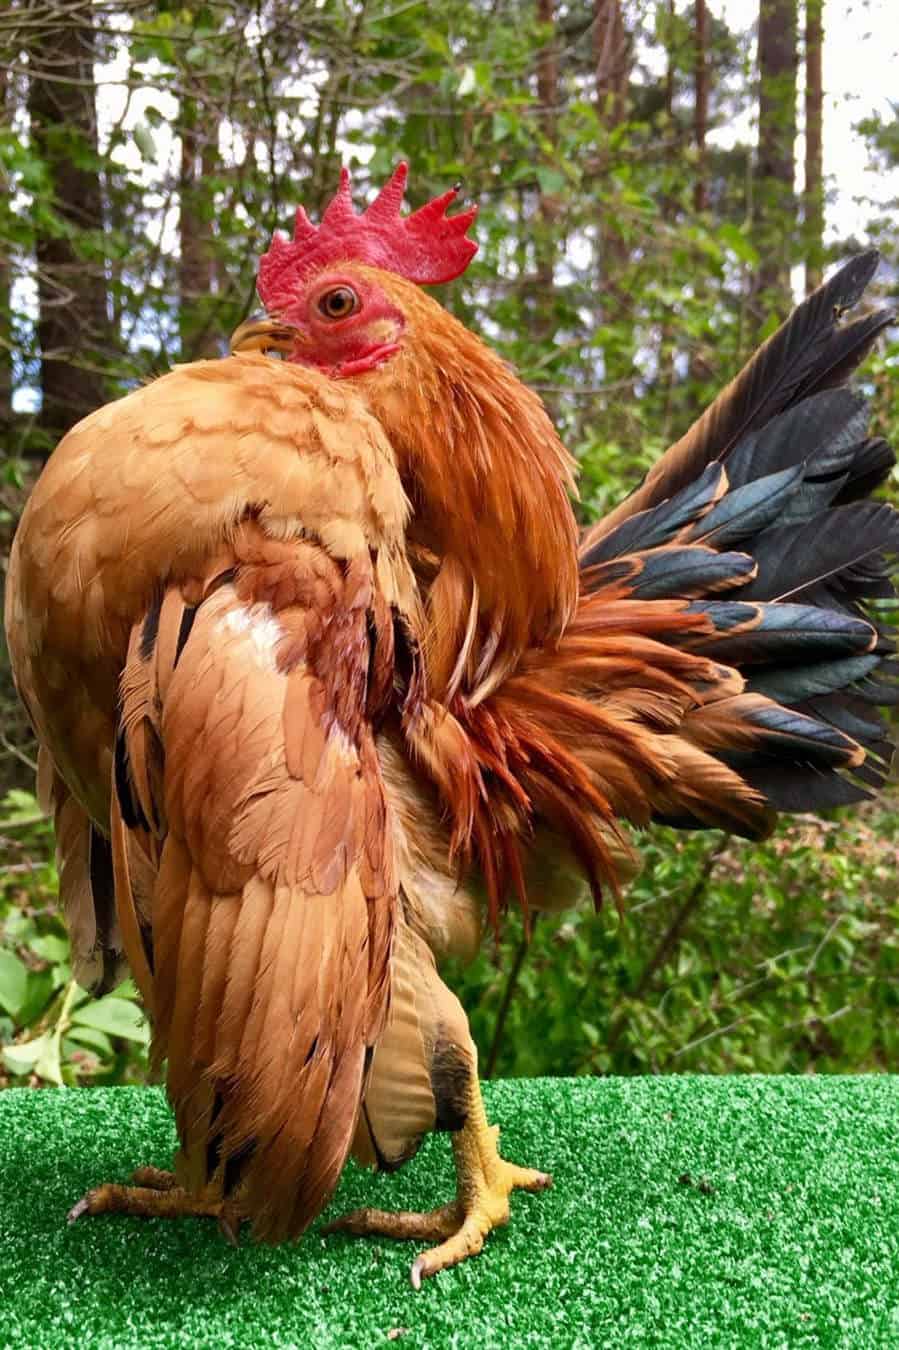 Details about   Malaysian Serama chicken hatching eggs 6 Possible Frizzle